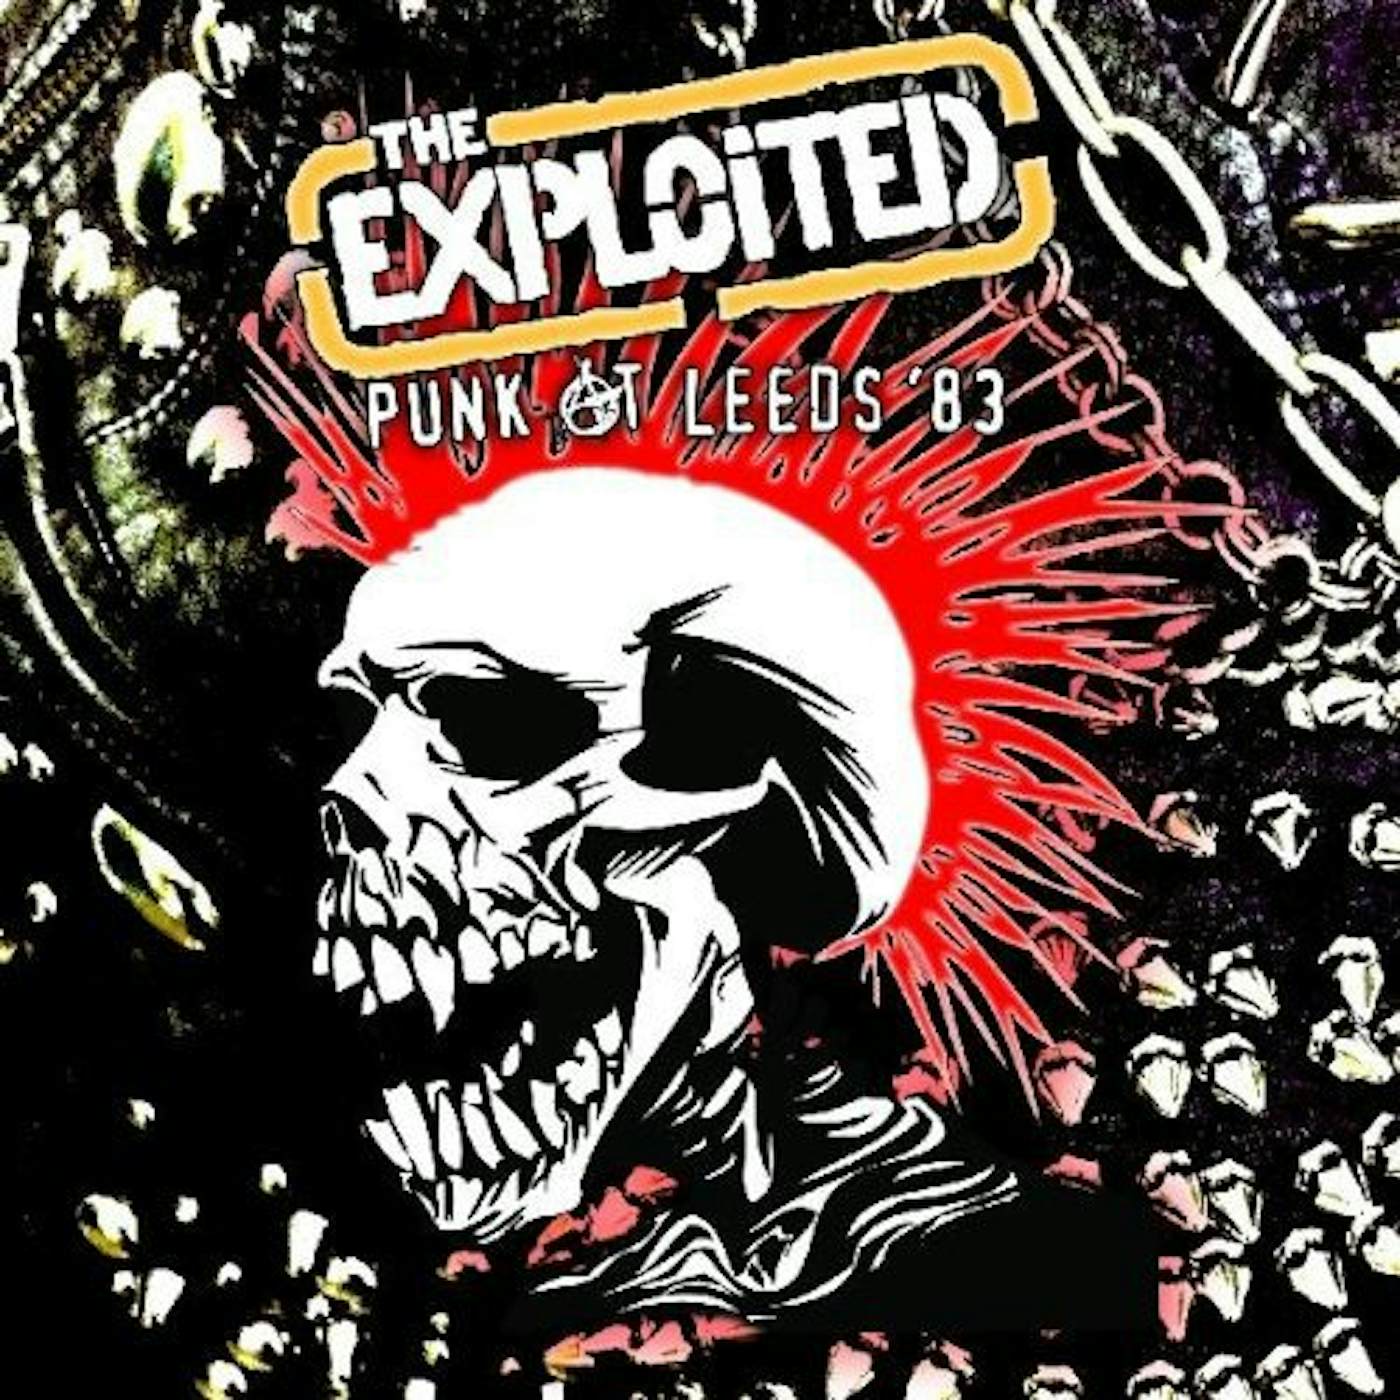 The Exploited PUNK AT LEEDS 83 Vinyl Record